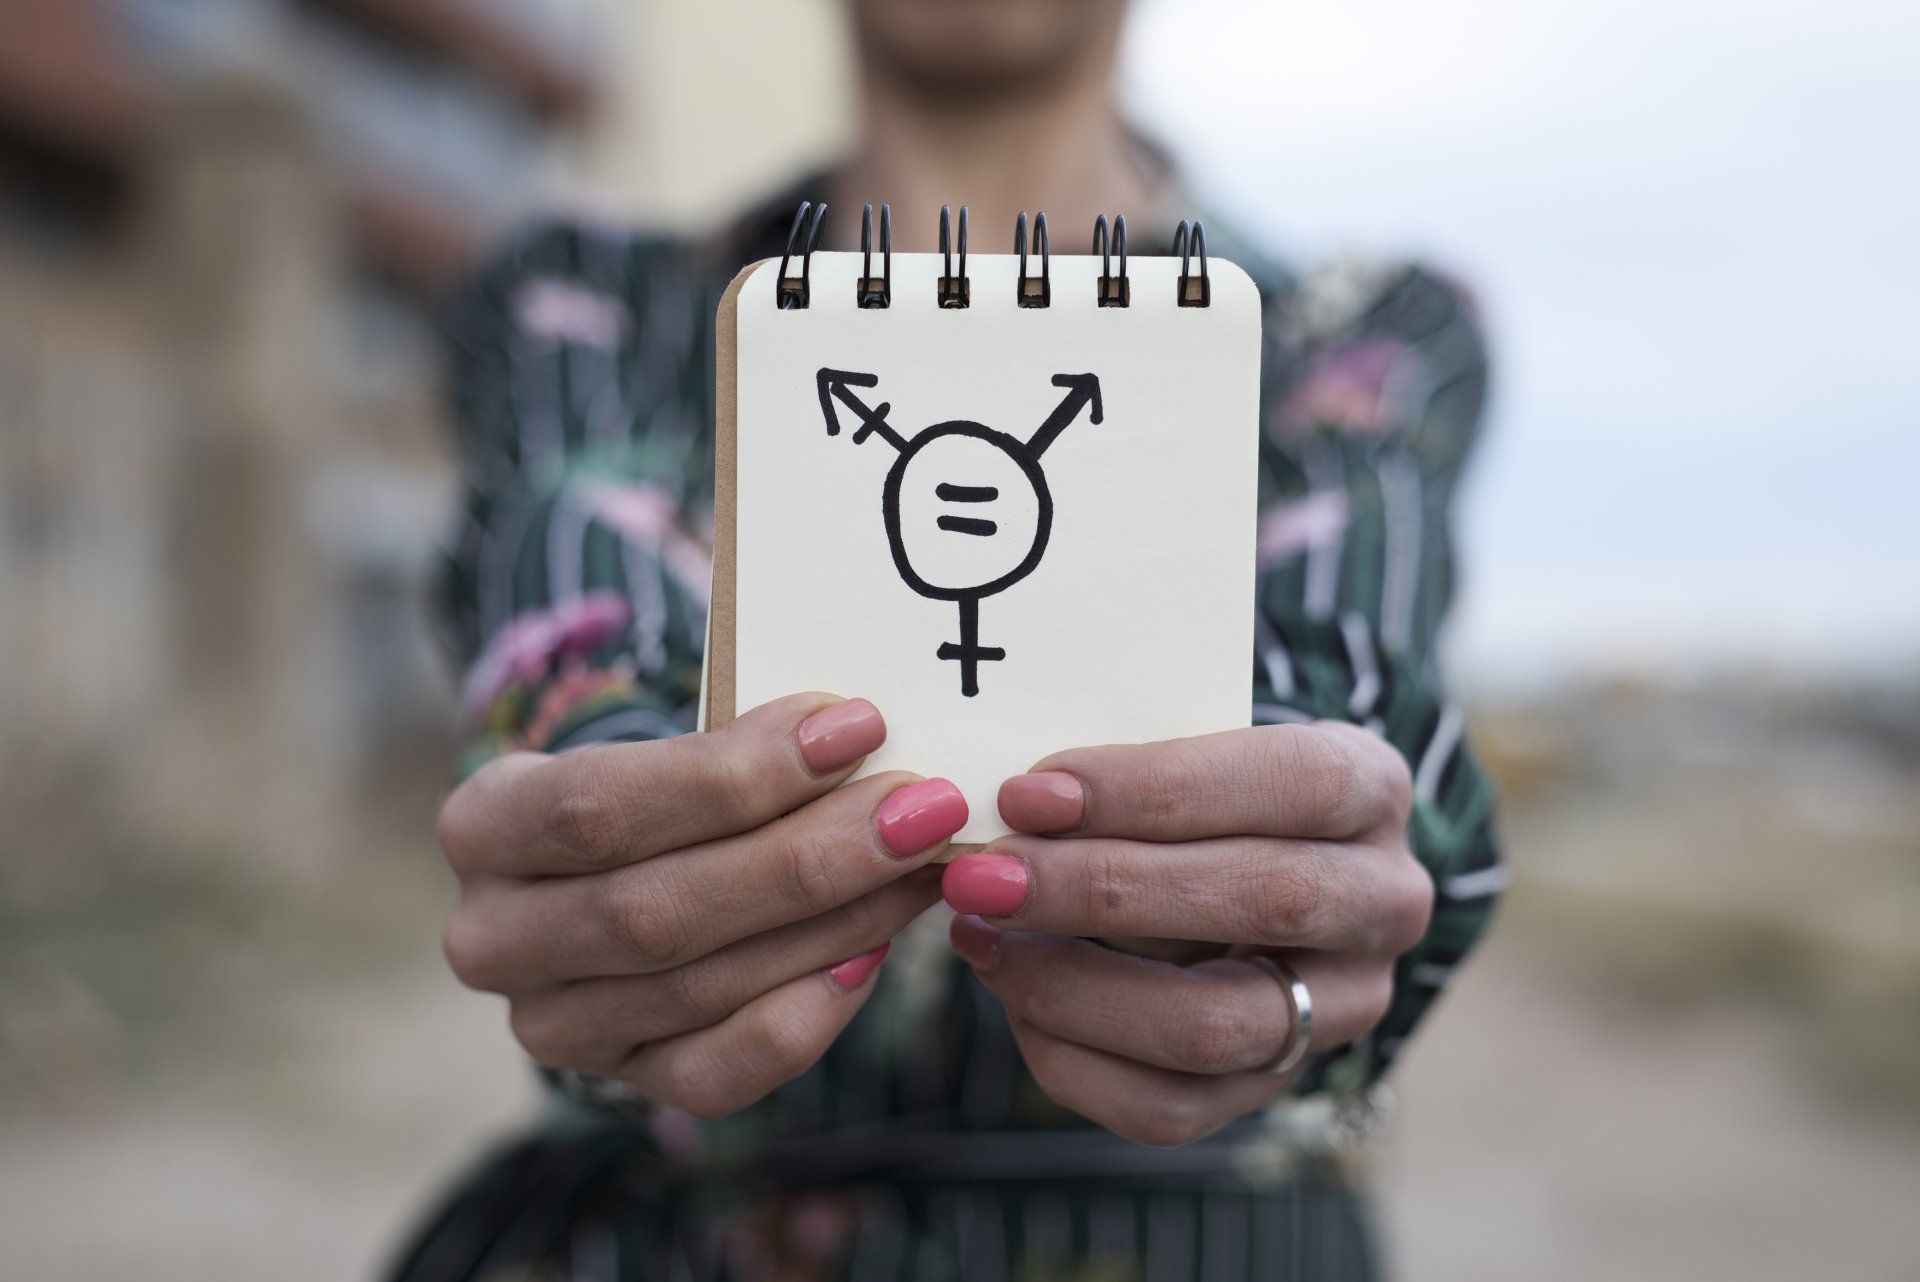 Woman shows notepad with a transgender equality symbol.